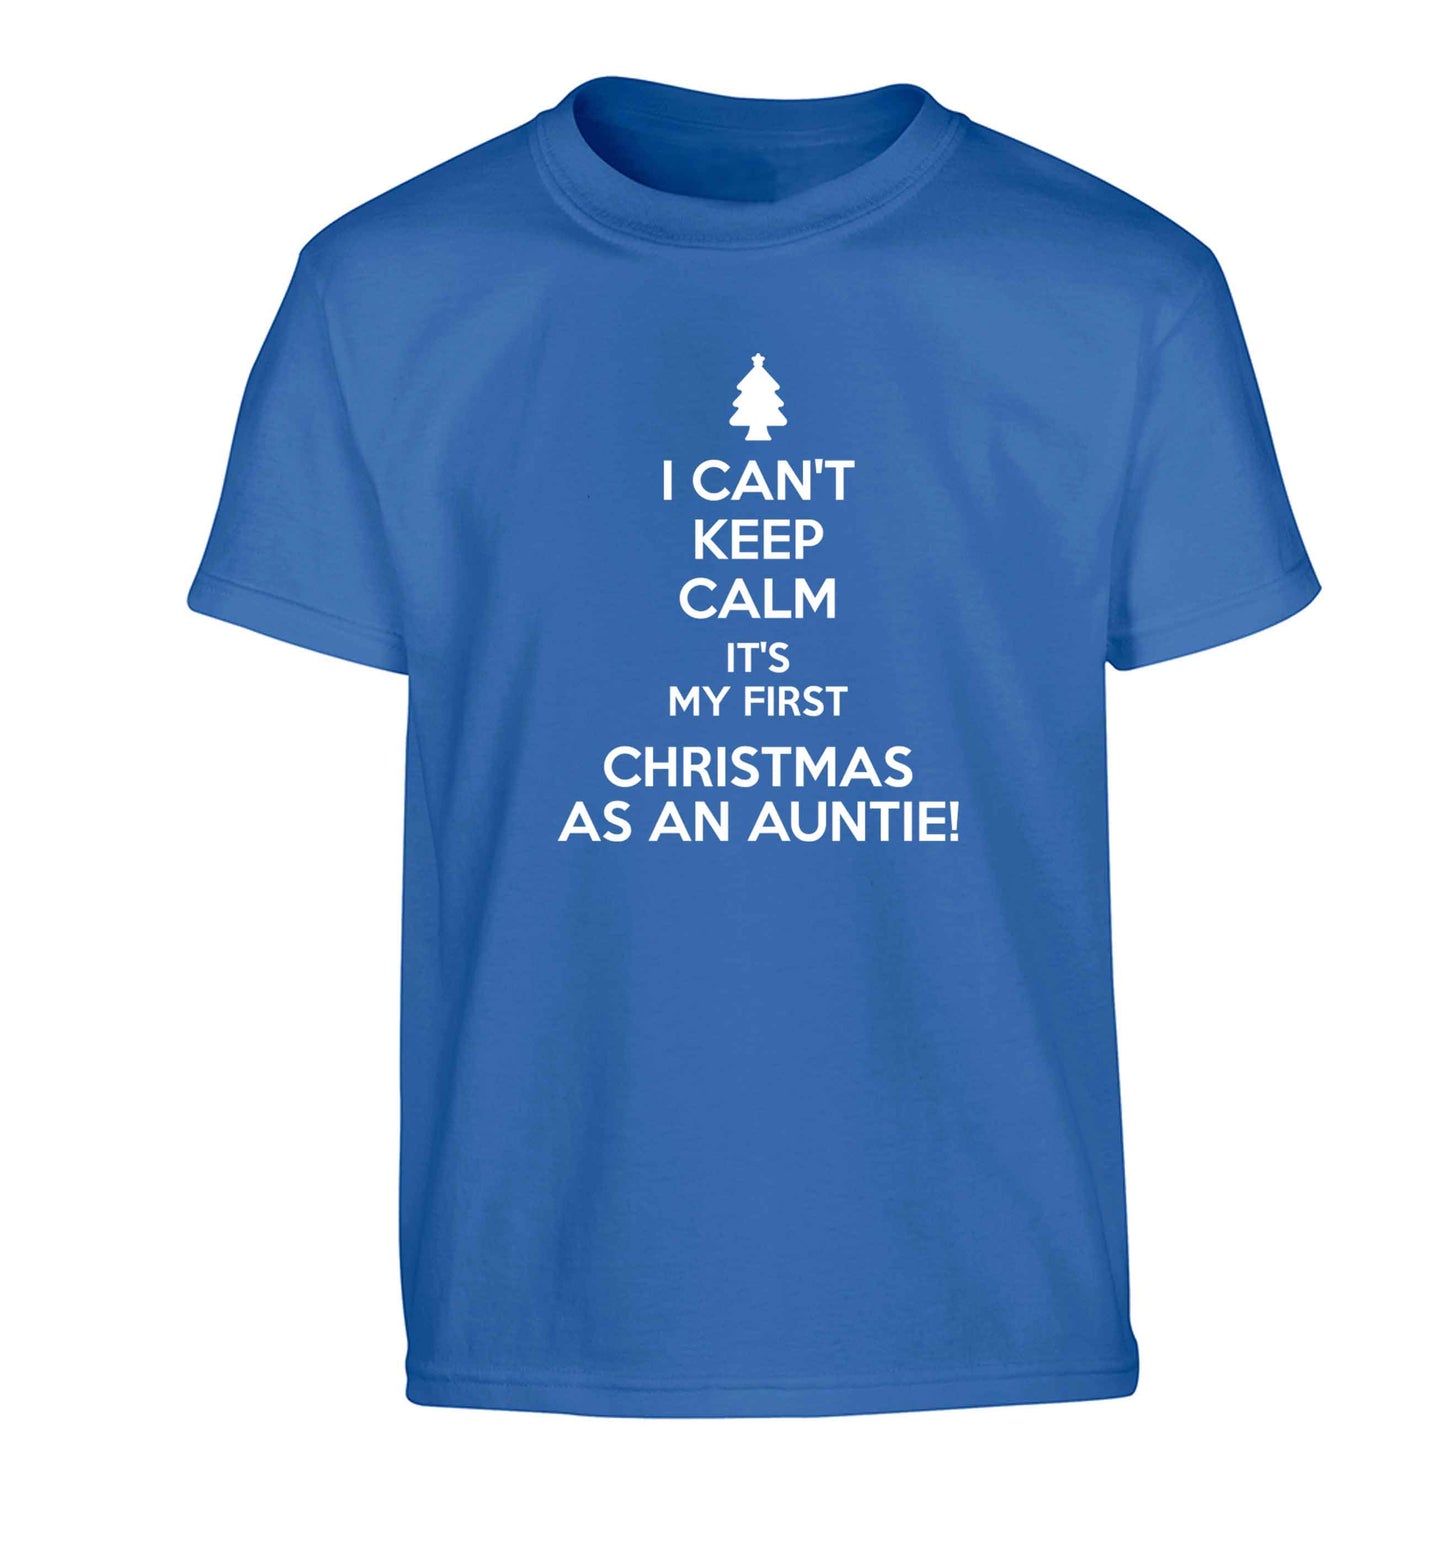 I can't keep calm it's my first Christmas as an auntie! Children's blue Tshirt 12-13 Years